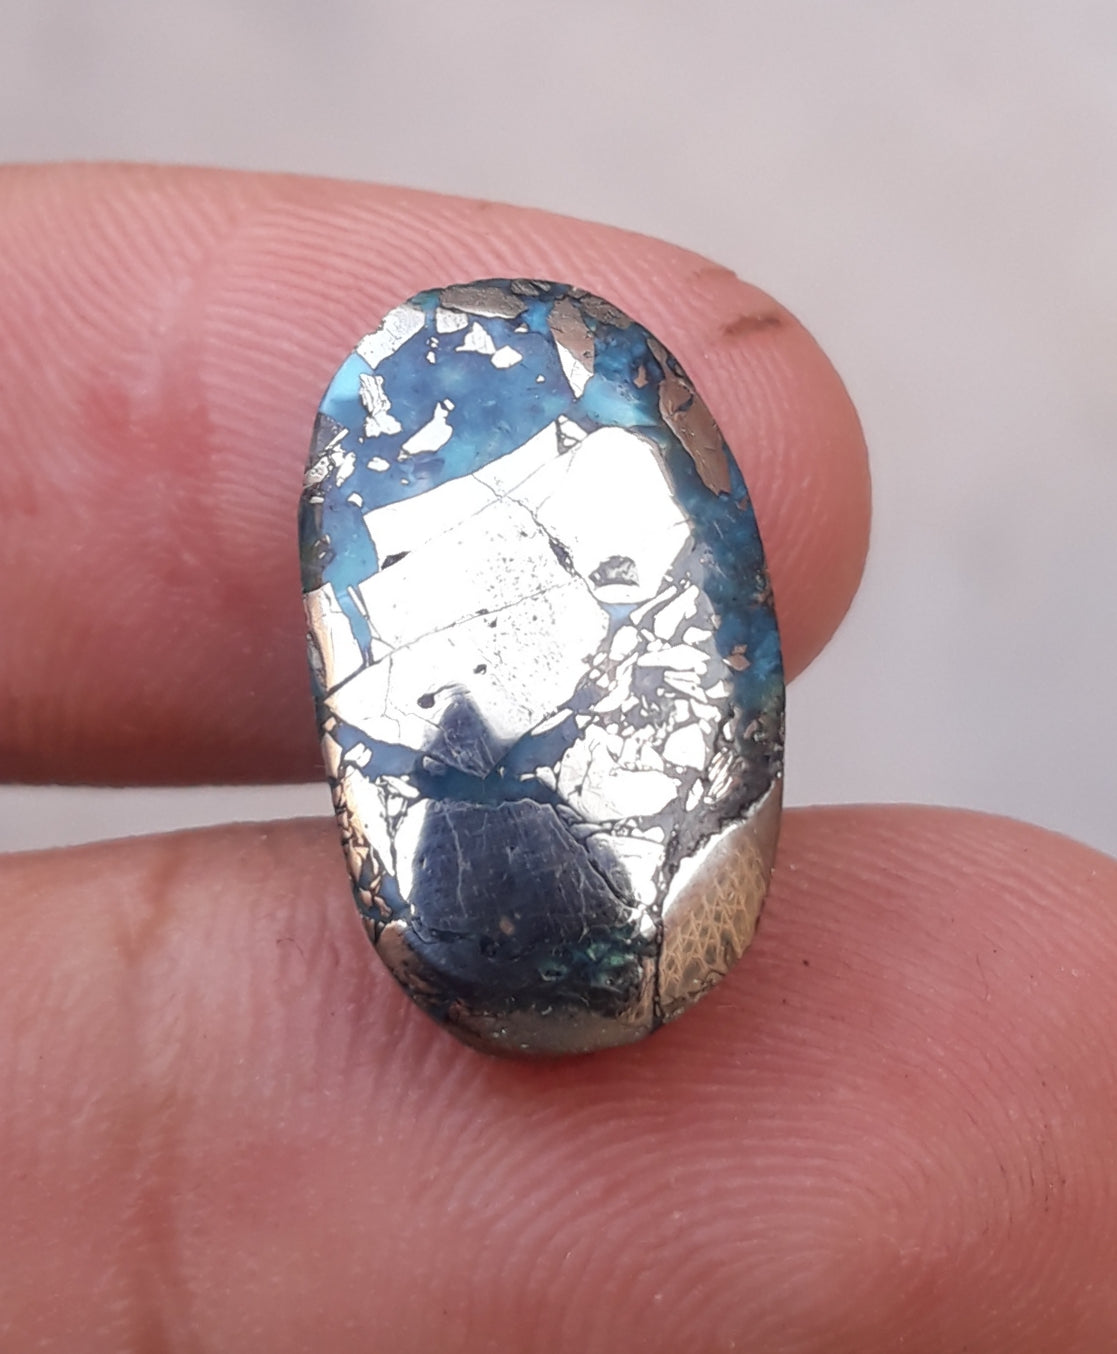 16ct Morenci Turquoise - Natural Certified Turquoise with Pyrite - Blue Matrix Turquoise - Shajri Feroza - 19x11mm